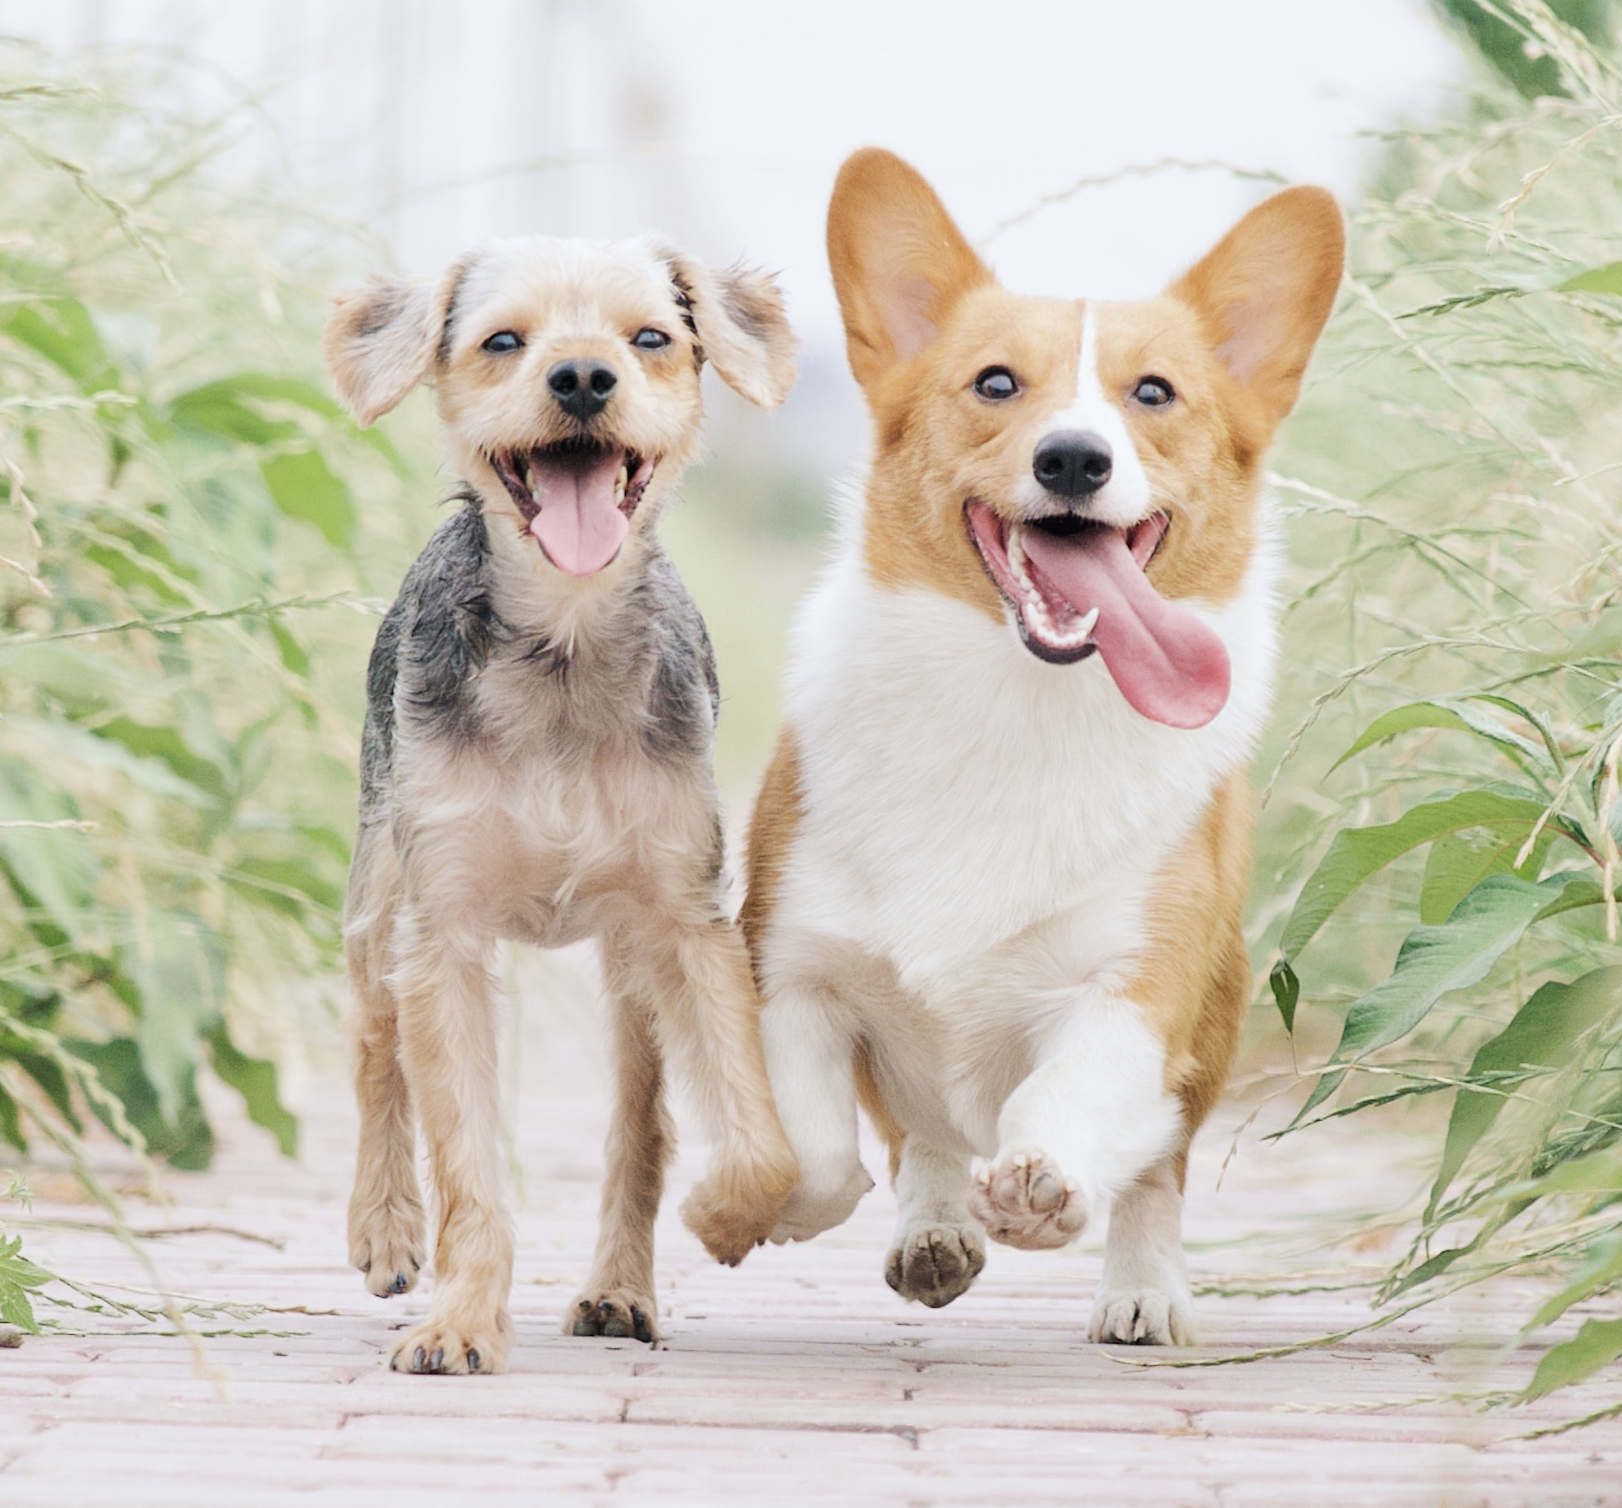 Signs It’s Time to Switch Your Pet’s Flea Medicine